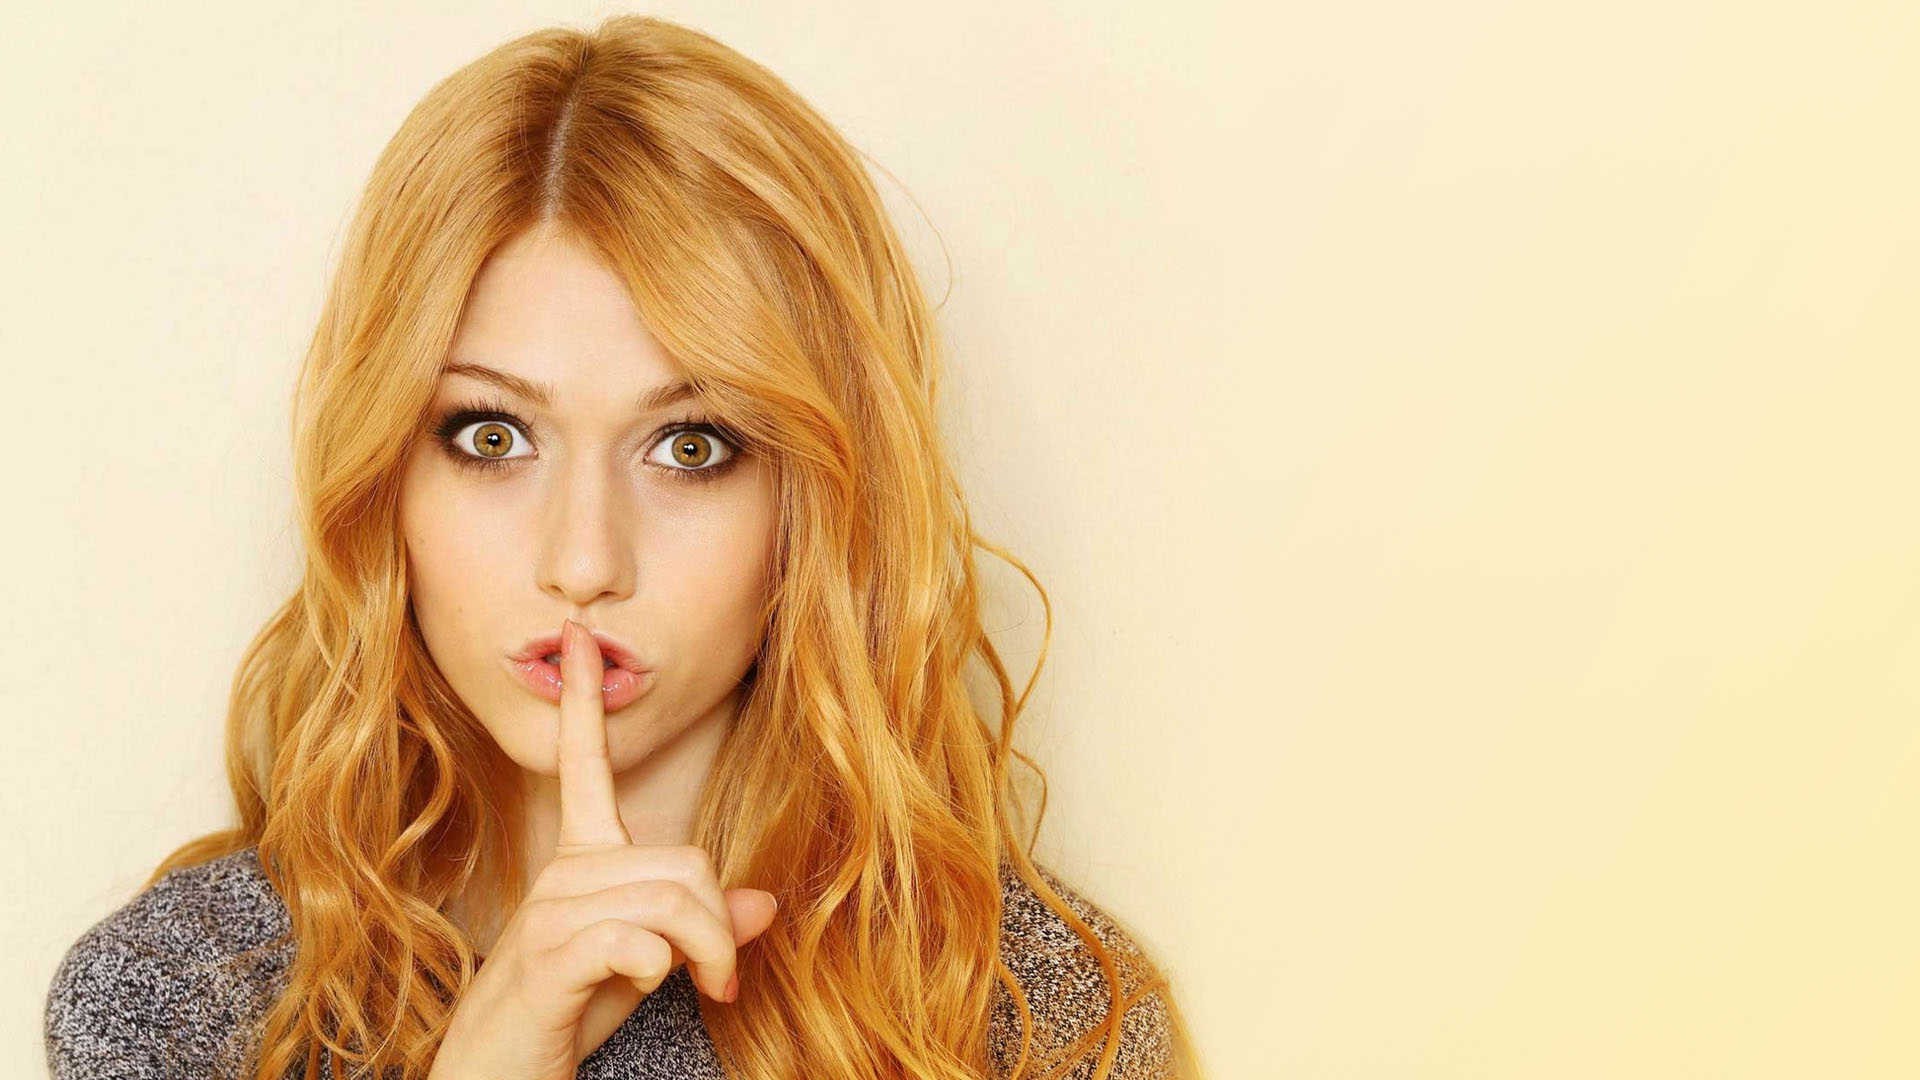 women, Katherine Mcnamara, Celebrity, Redhead, Actress, Finger On Lips, Looking At Viewer, Against Wall Wallpaper